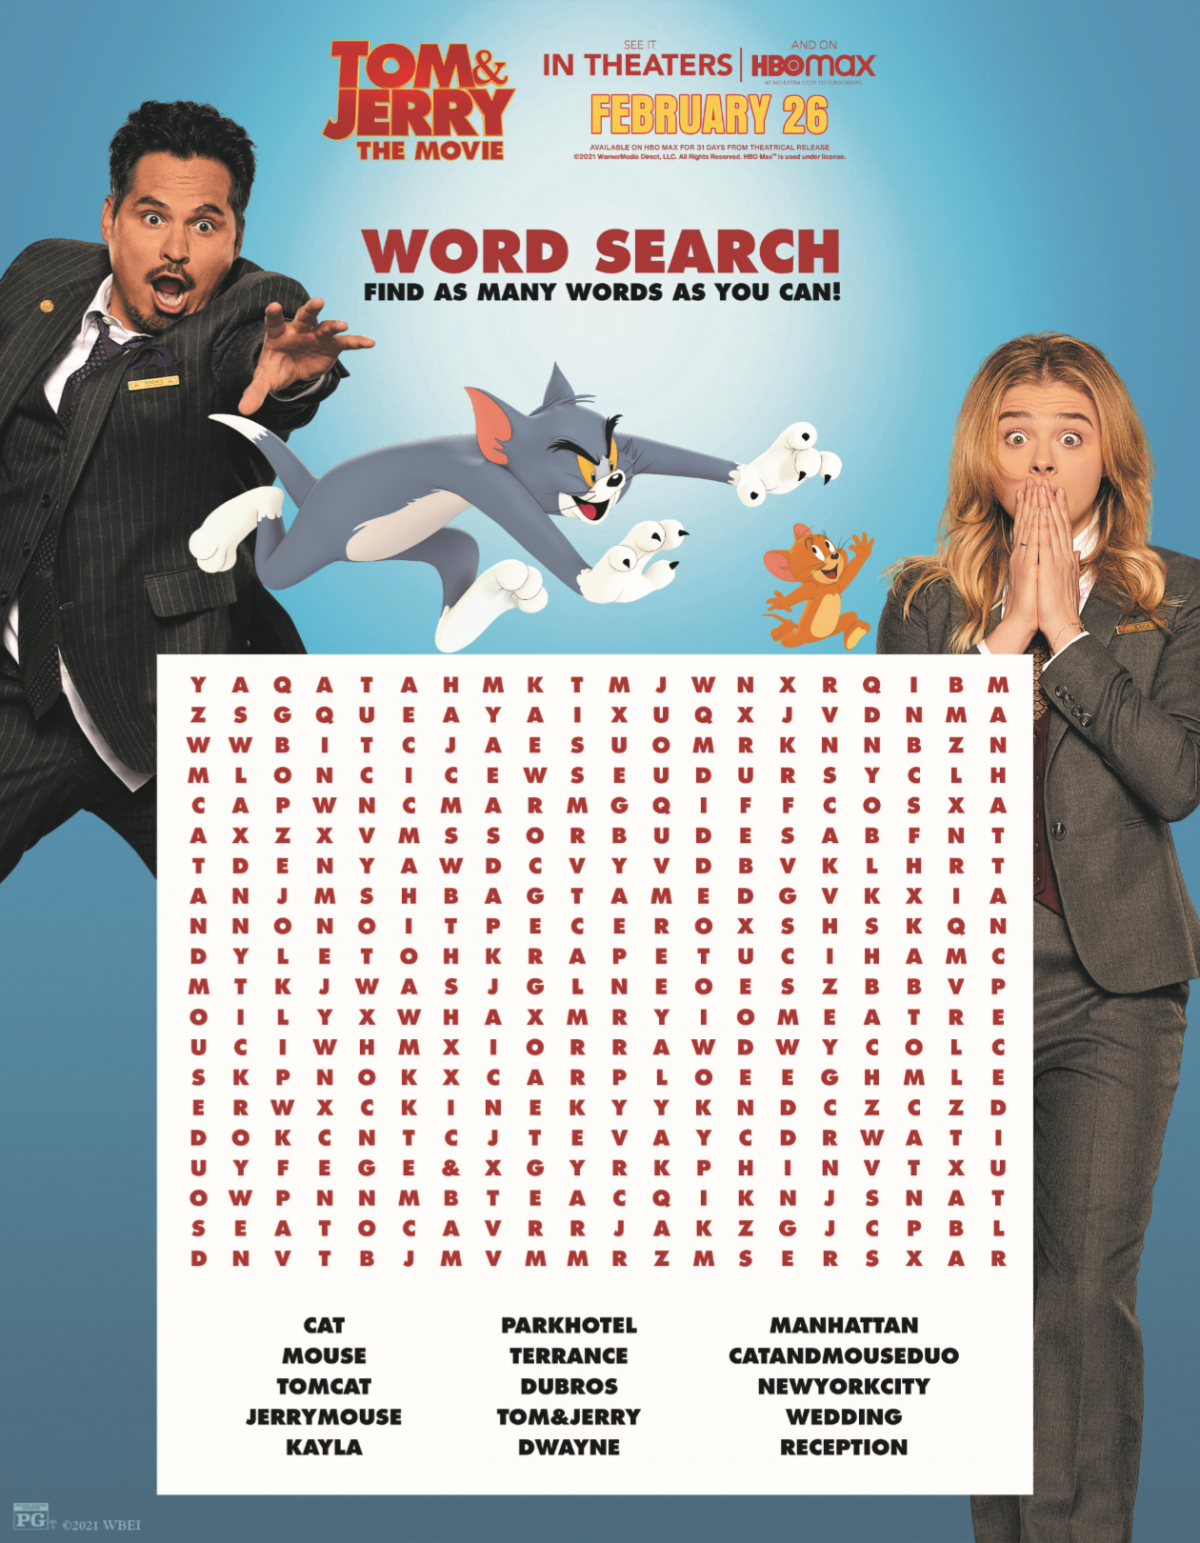 Tom and Jerry Movie word search activity page.